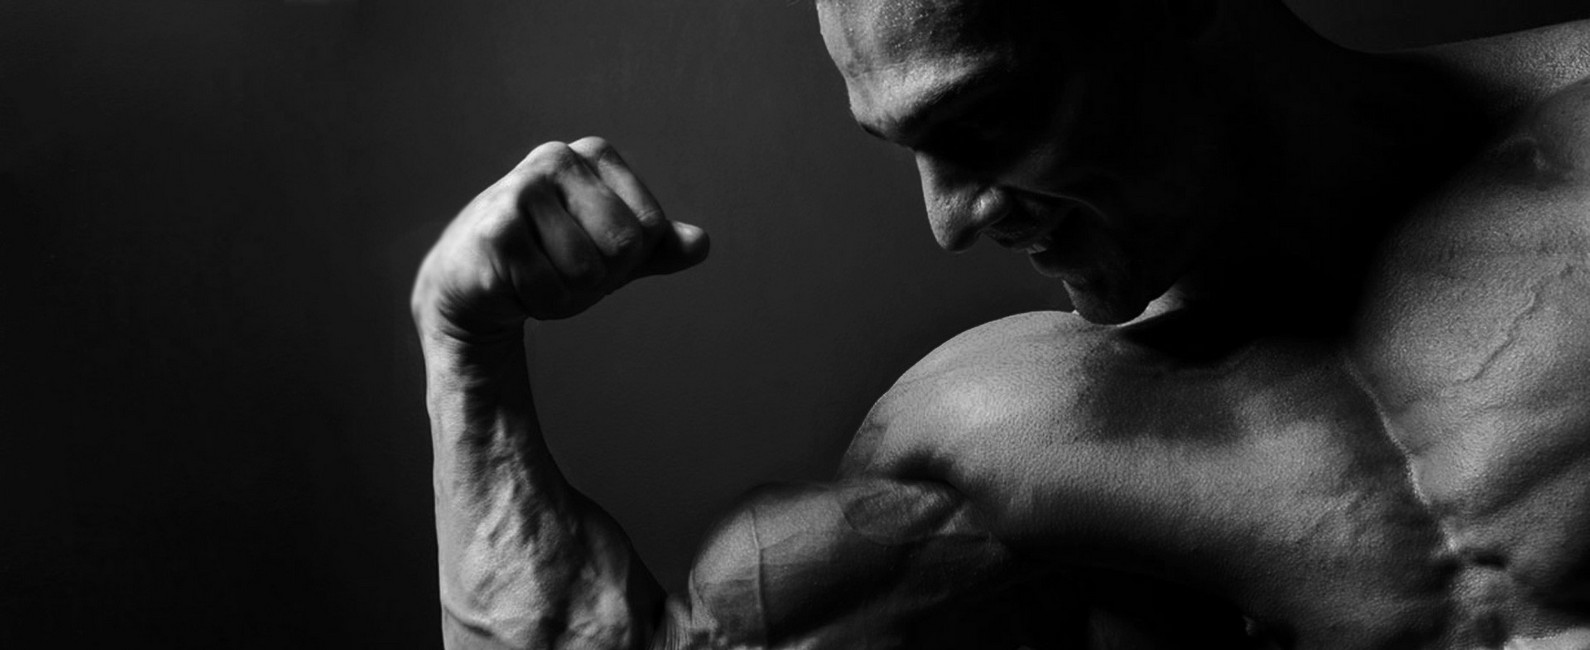 Legal supplements for muscle growth